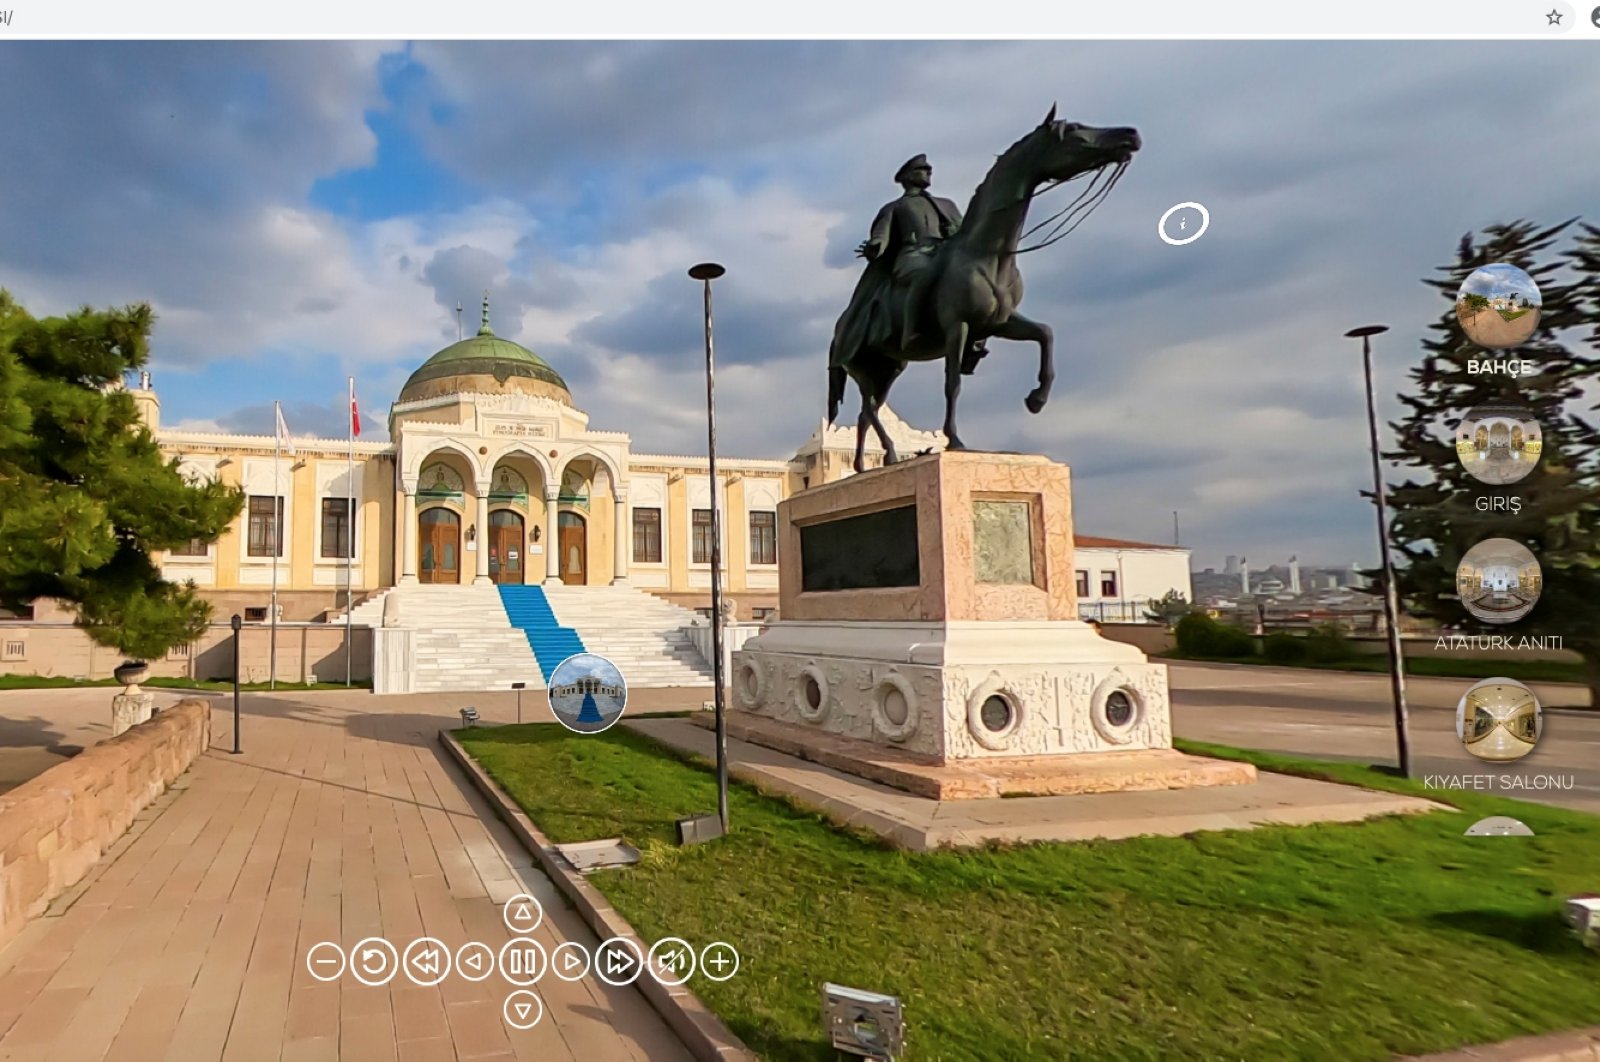 A still shot from the virtual tour of Turkey's Ethnography Museum of Ankara.